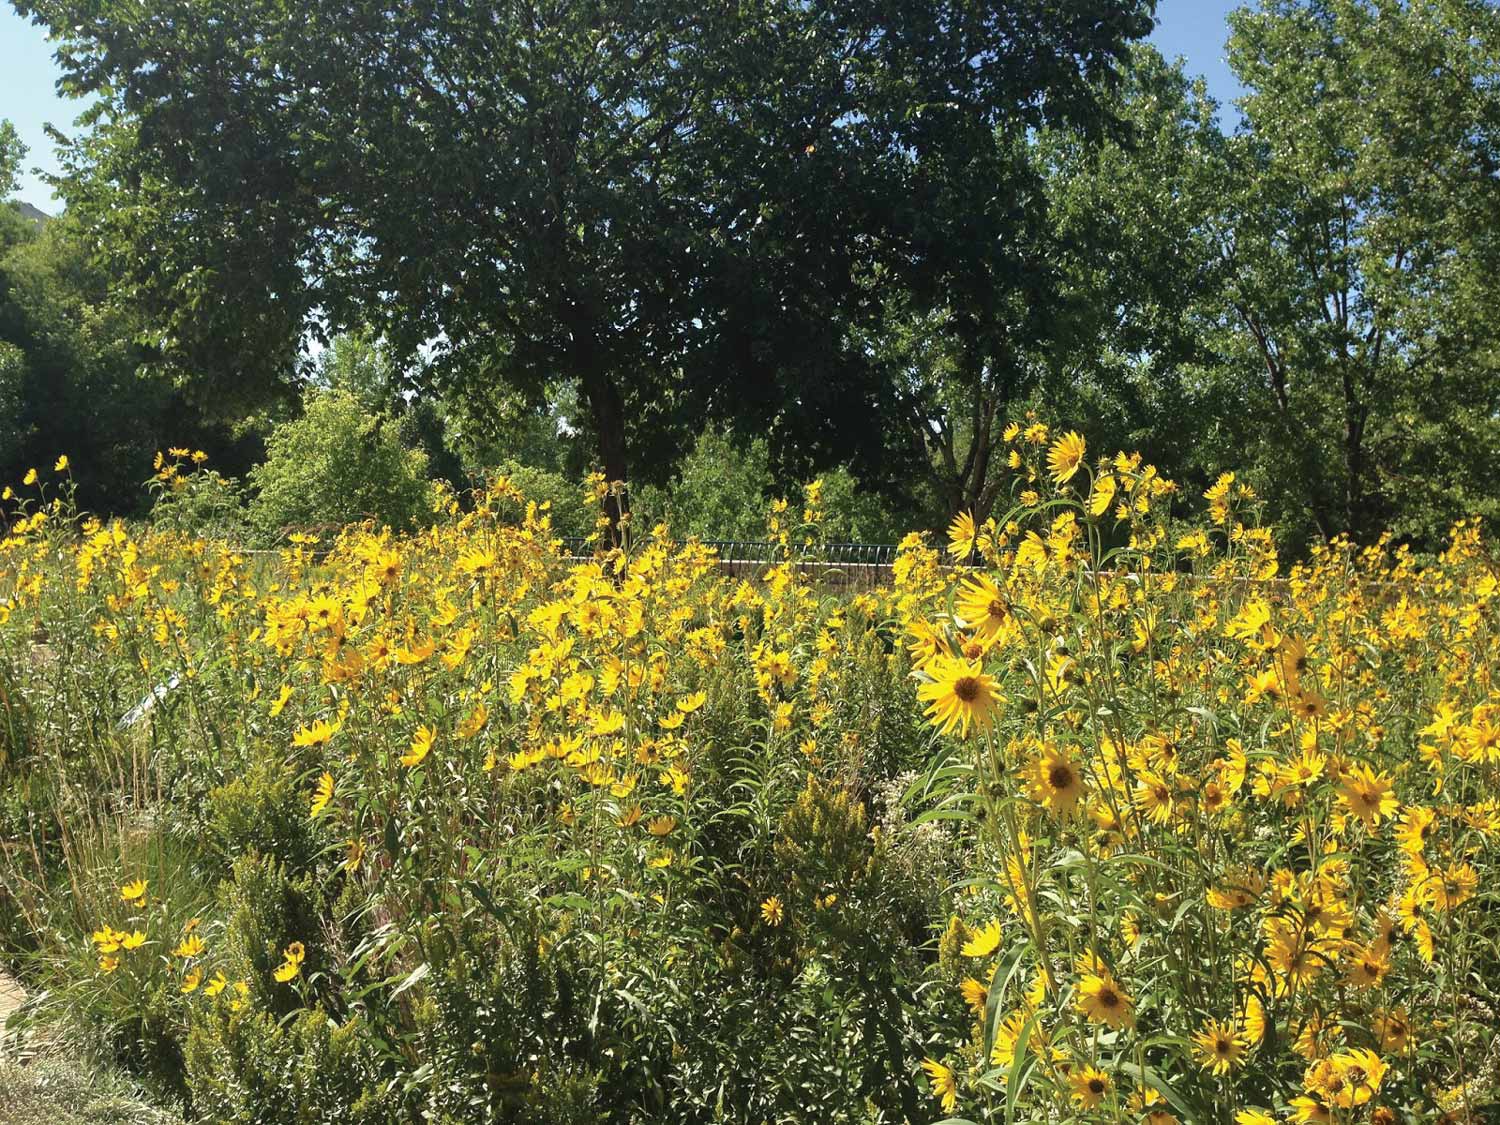 A dense patch of yellow flowers in front of trees